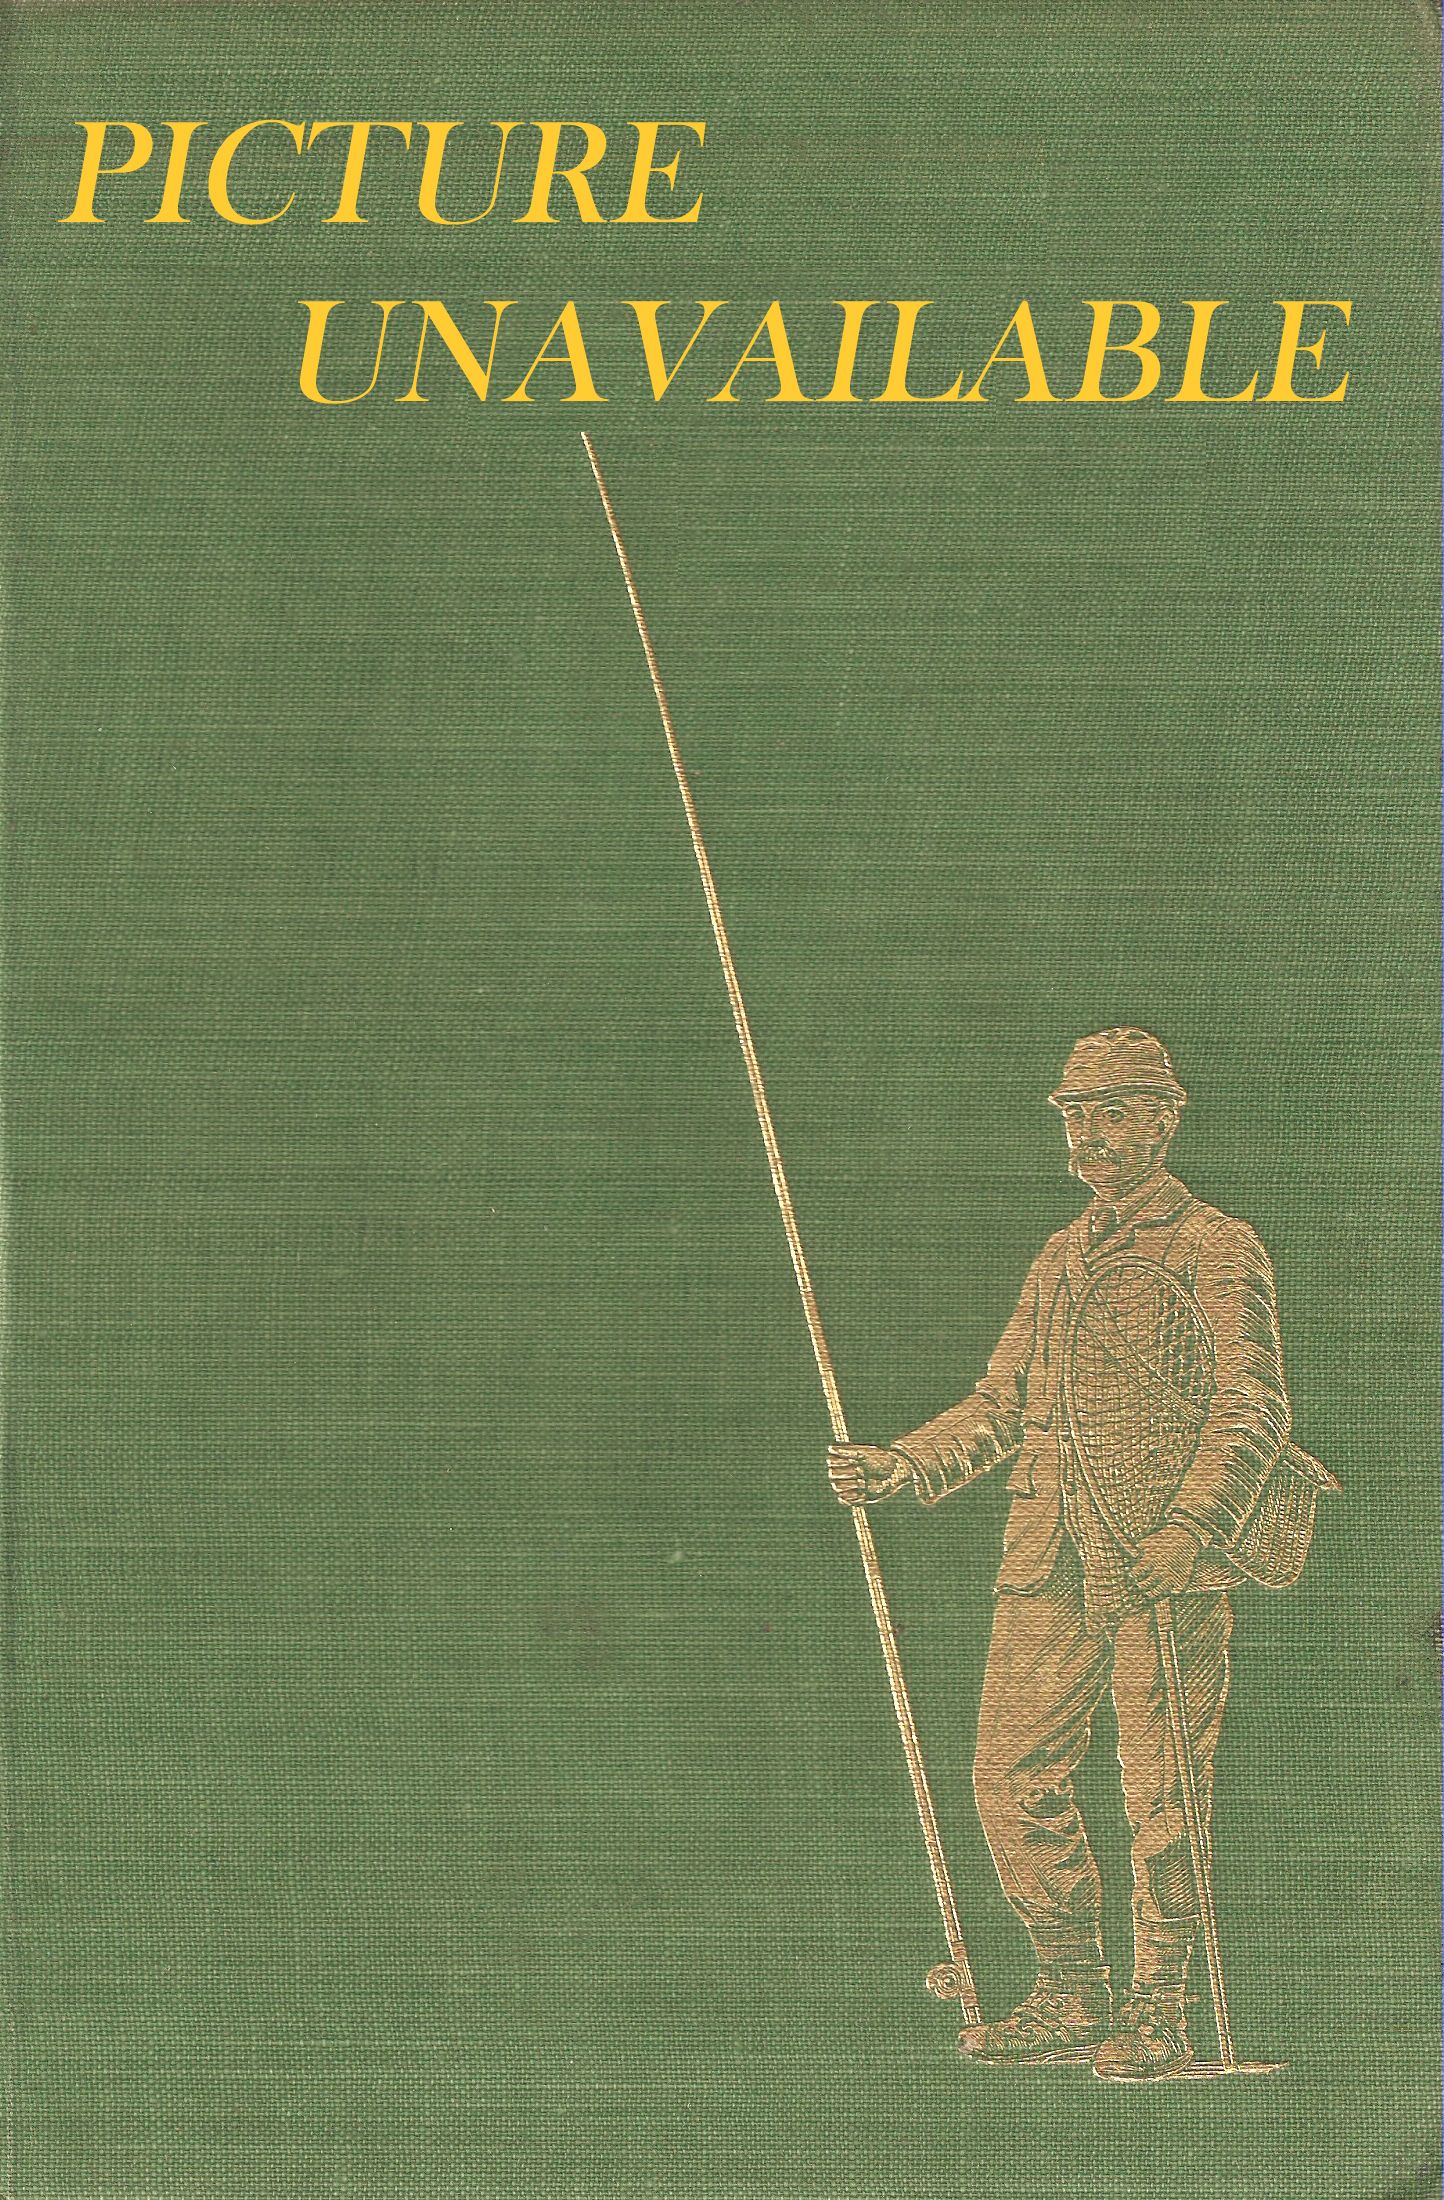 COARSE FISH: WITH NOTES ON TAXIDERMY, FISHING IN THE LOWER THAMES, ETC. By  Charles H. Wheeley. The Angler's Library Volume I.